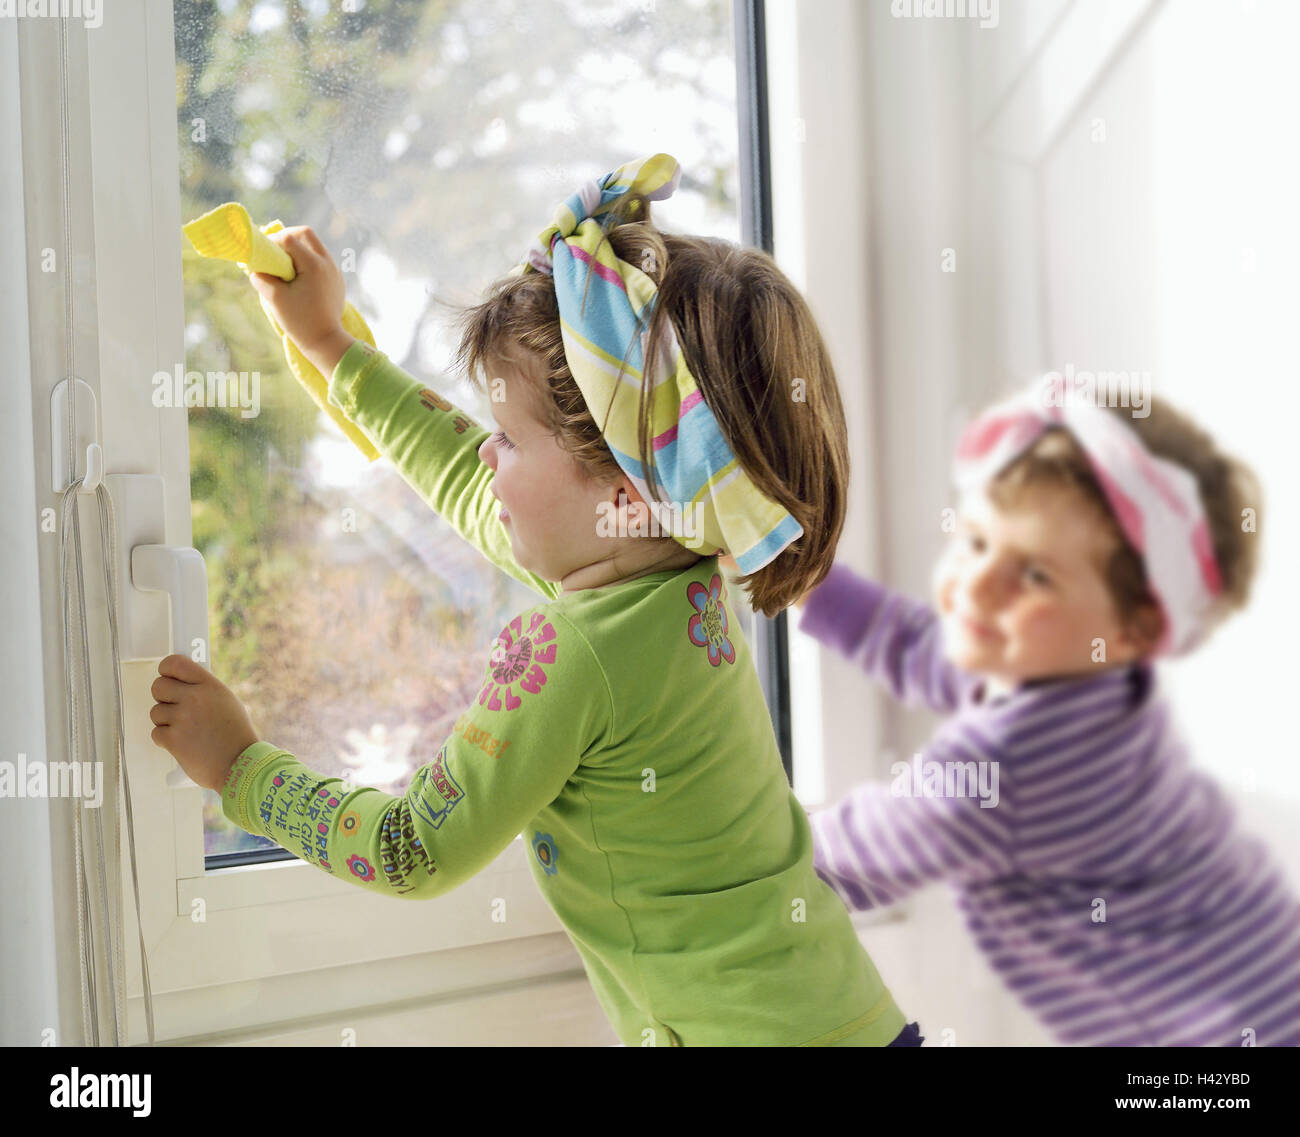 Children, girls, windows clean, detail, twins 3 years, sisters, siblings, friends, friendship, childhood, housecleaning, window plaster, 'cleaning devil', cloths, fungus cloths, windowpane, clean, dry, together, cohesion, motivation, ambition, inside, Ti1 Stock Photo